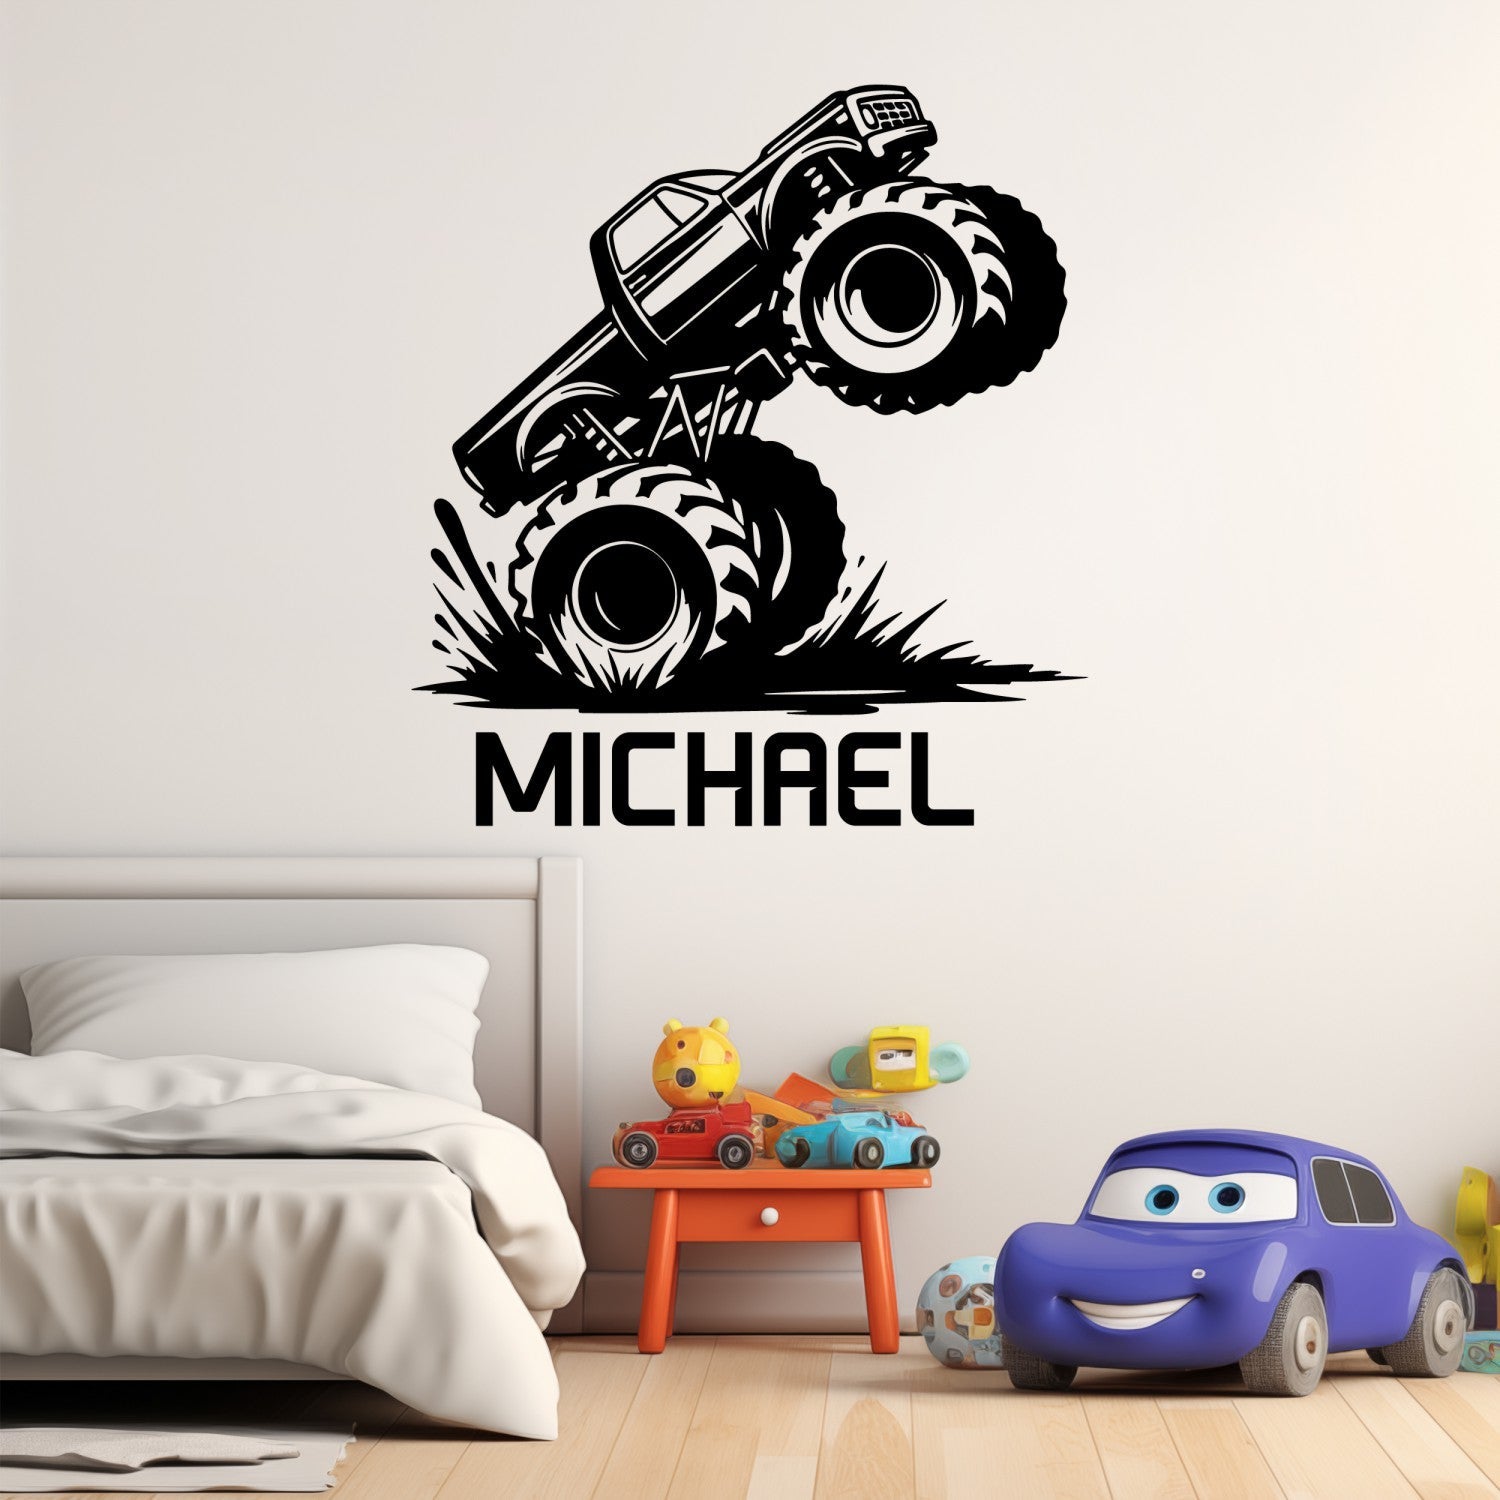 Monster Truck Room Decor for Boys - Monster Truck Wall Decals with Personalized Name - Name Decals for Walls with Monster Truck